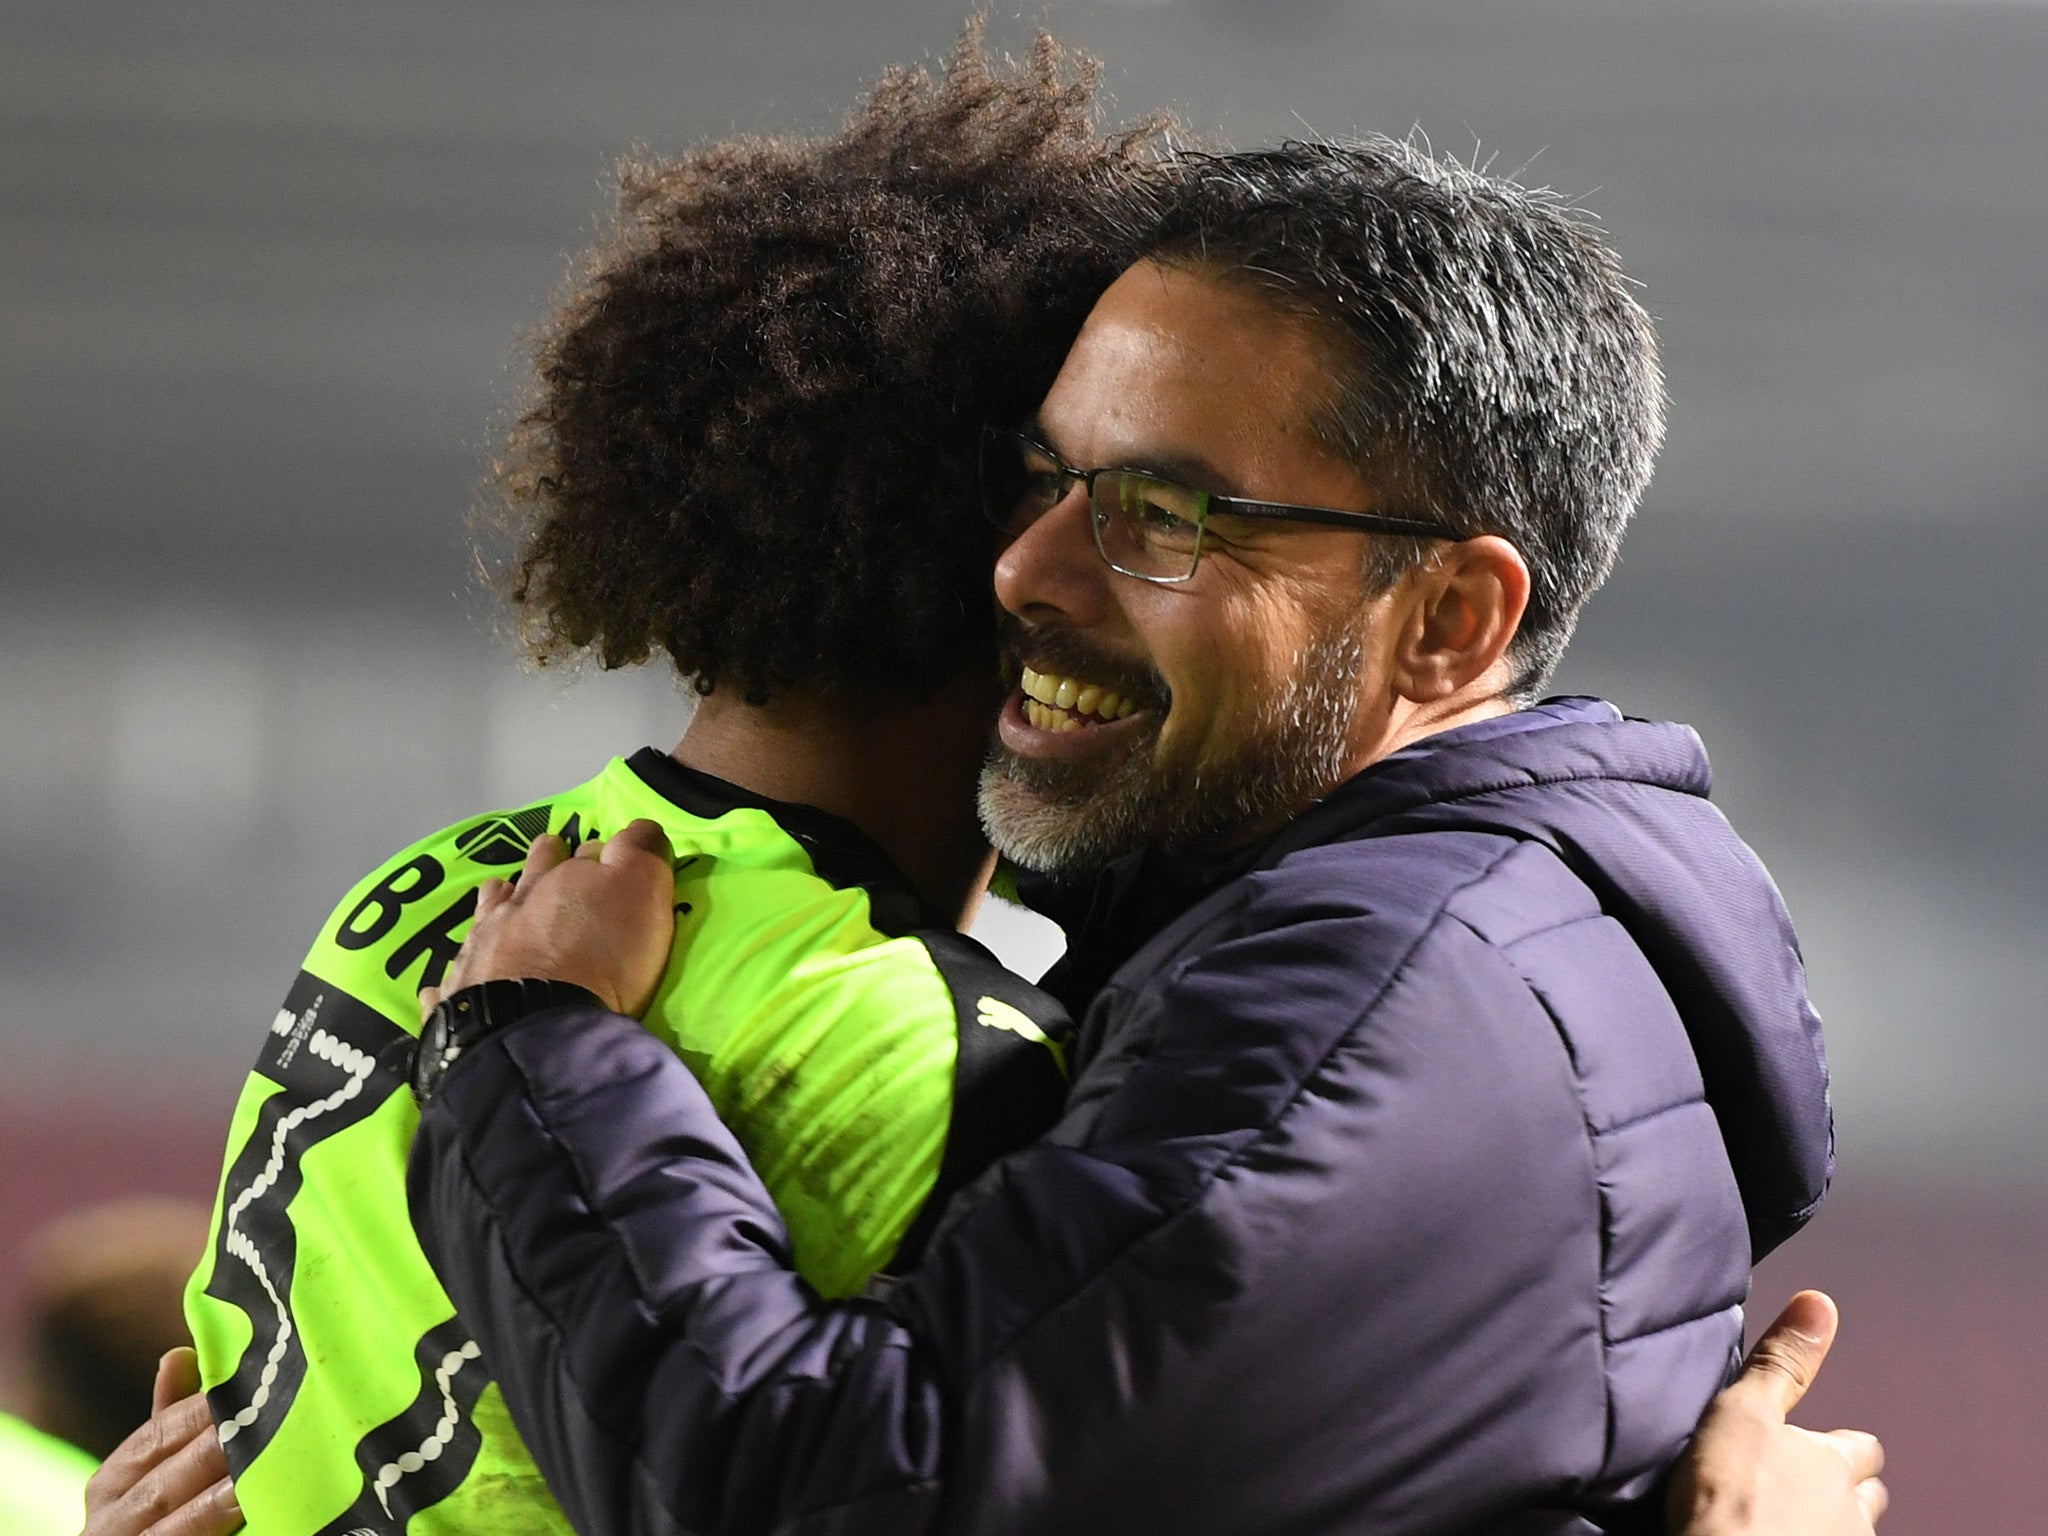 David Wagner's infectious personality and faultless work ethic has rejuvenated Huddersfield's fortunes